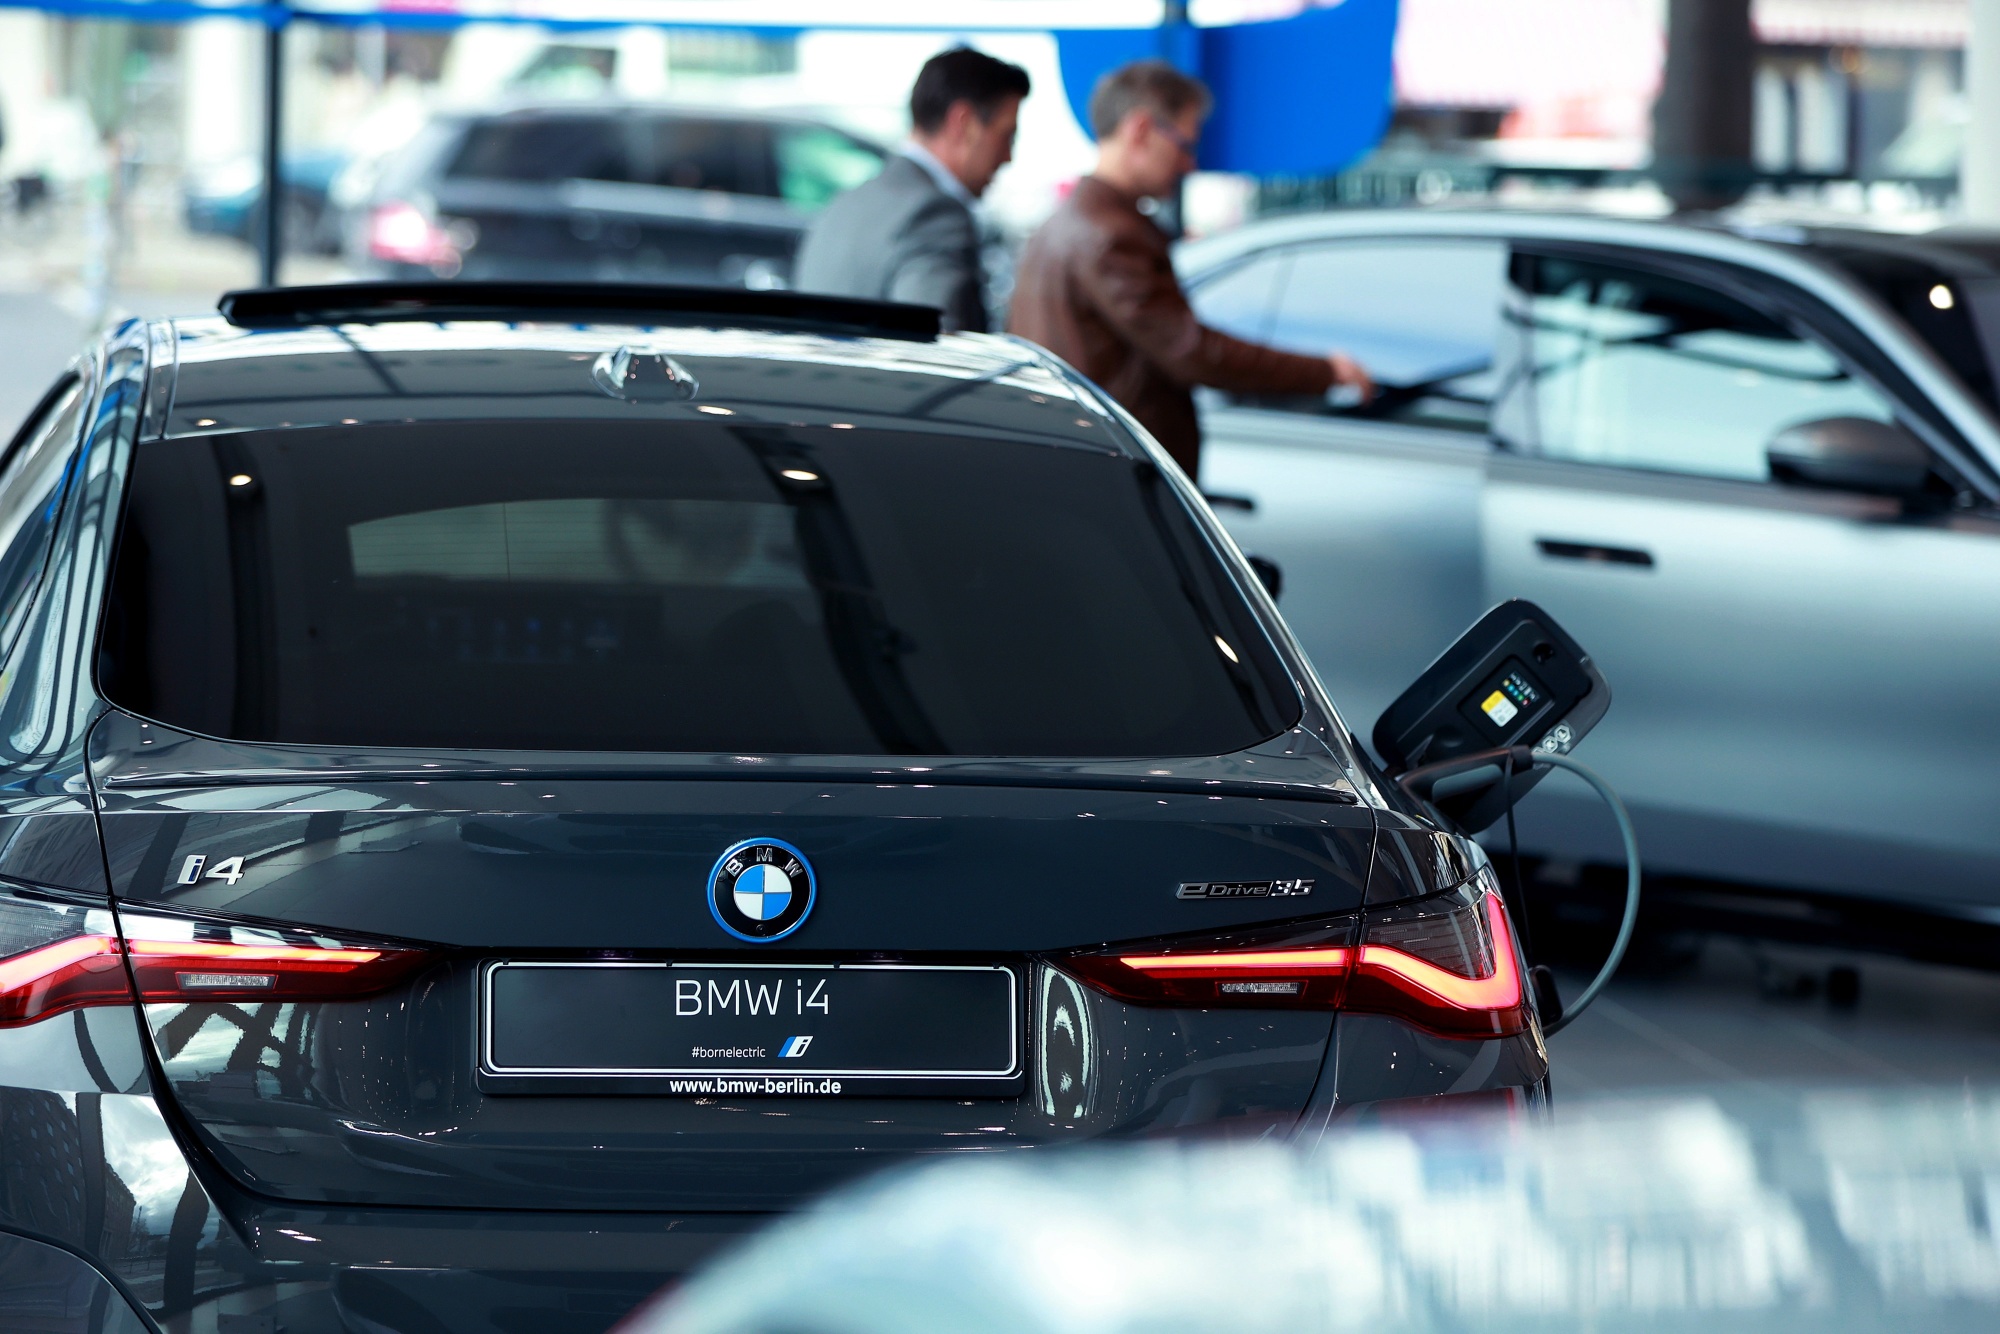 BMW Sees Strong Demand for Electric Vehicles Amidst Industry Downturn